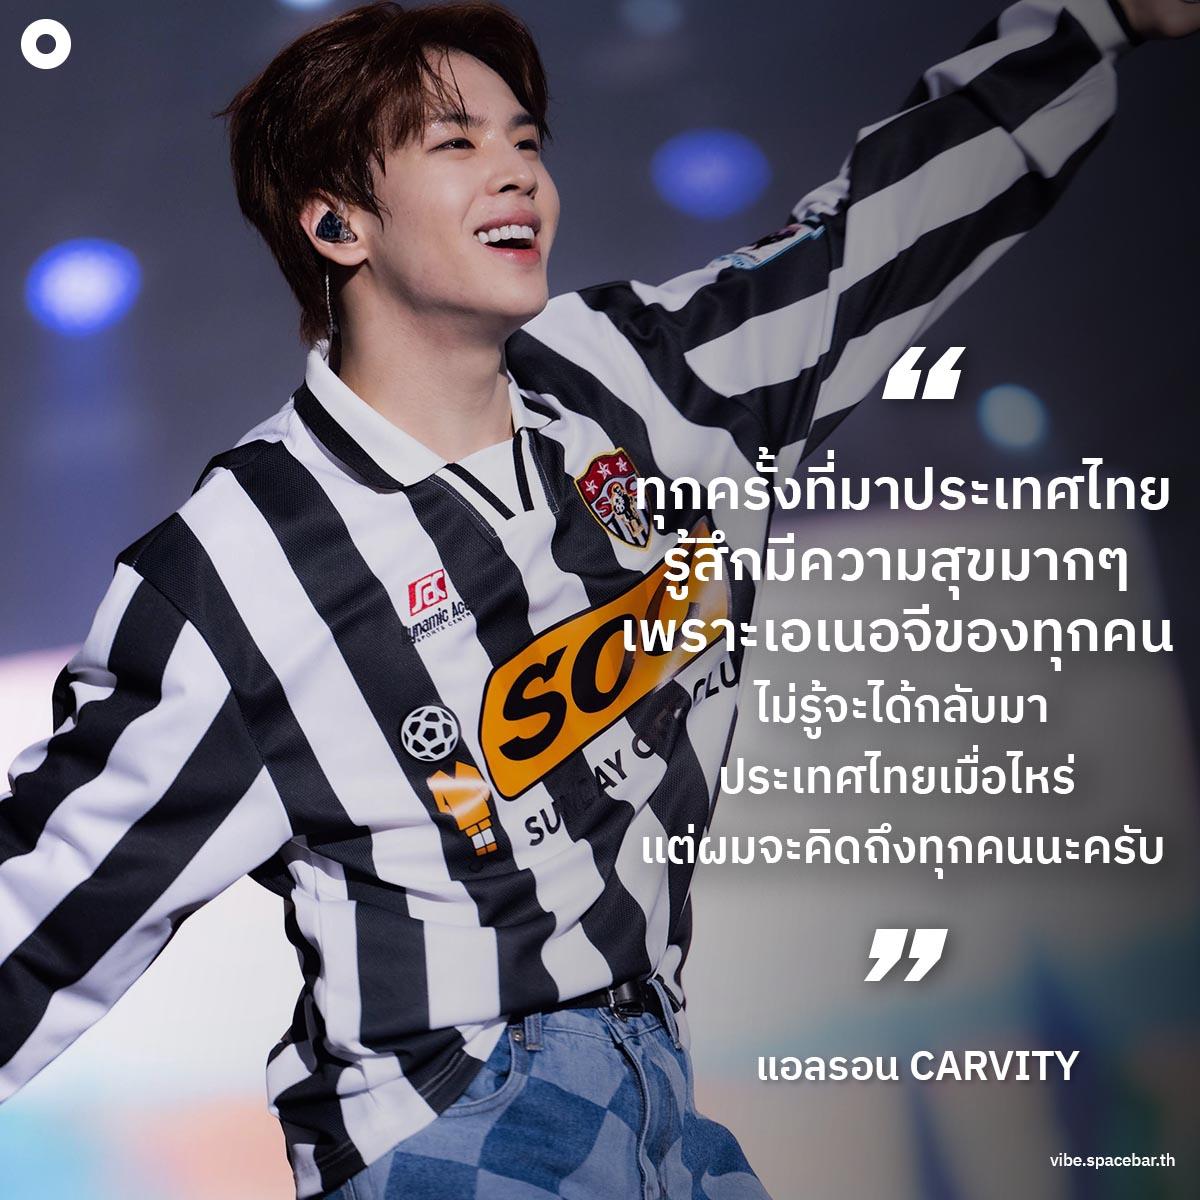 Think-thing-messages-from-cravity-to-thai-luvity-SPACEBAR-Photo02.jpg